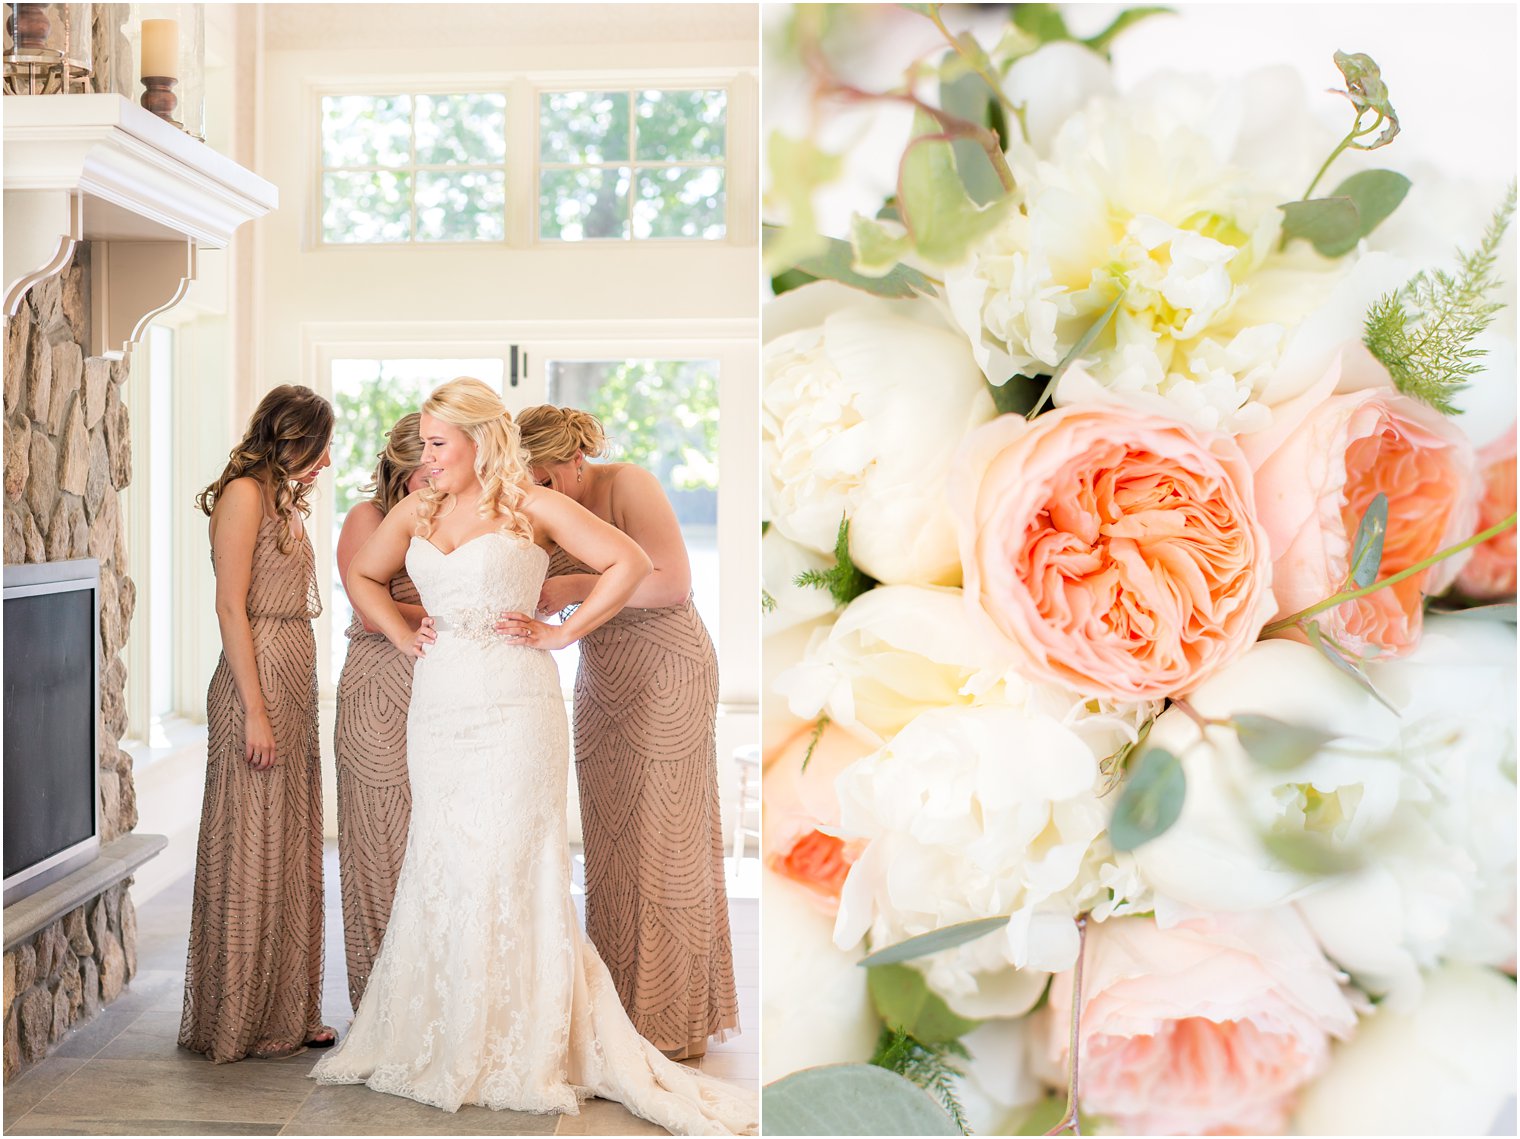 Bridesmaids getting ready with bride | | Photos by Indian Trail Club Wedding Photographer Idalia Photography